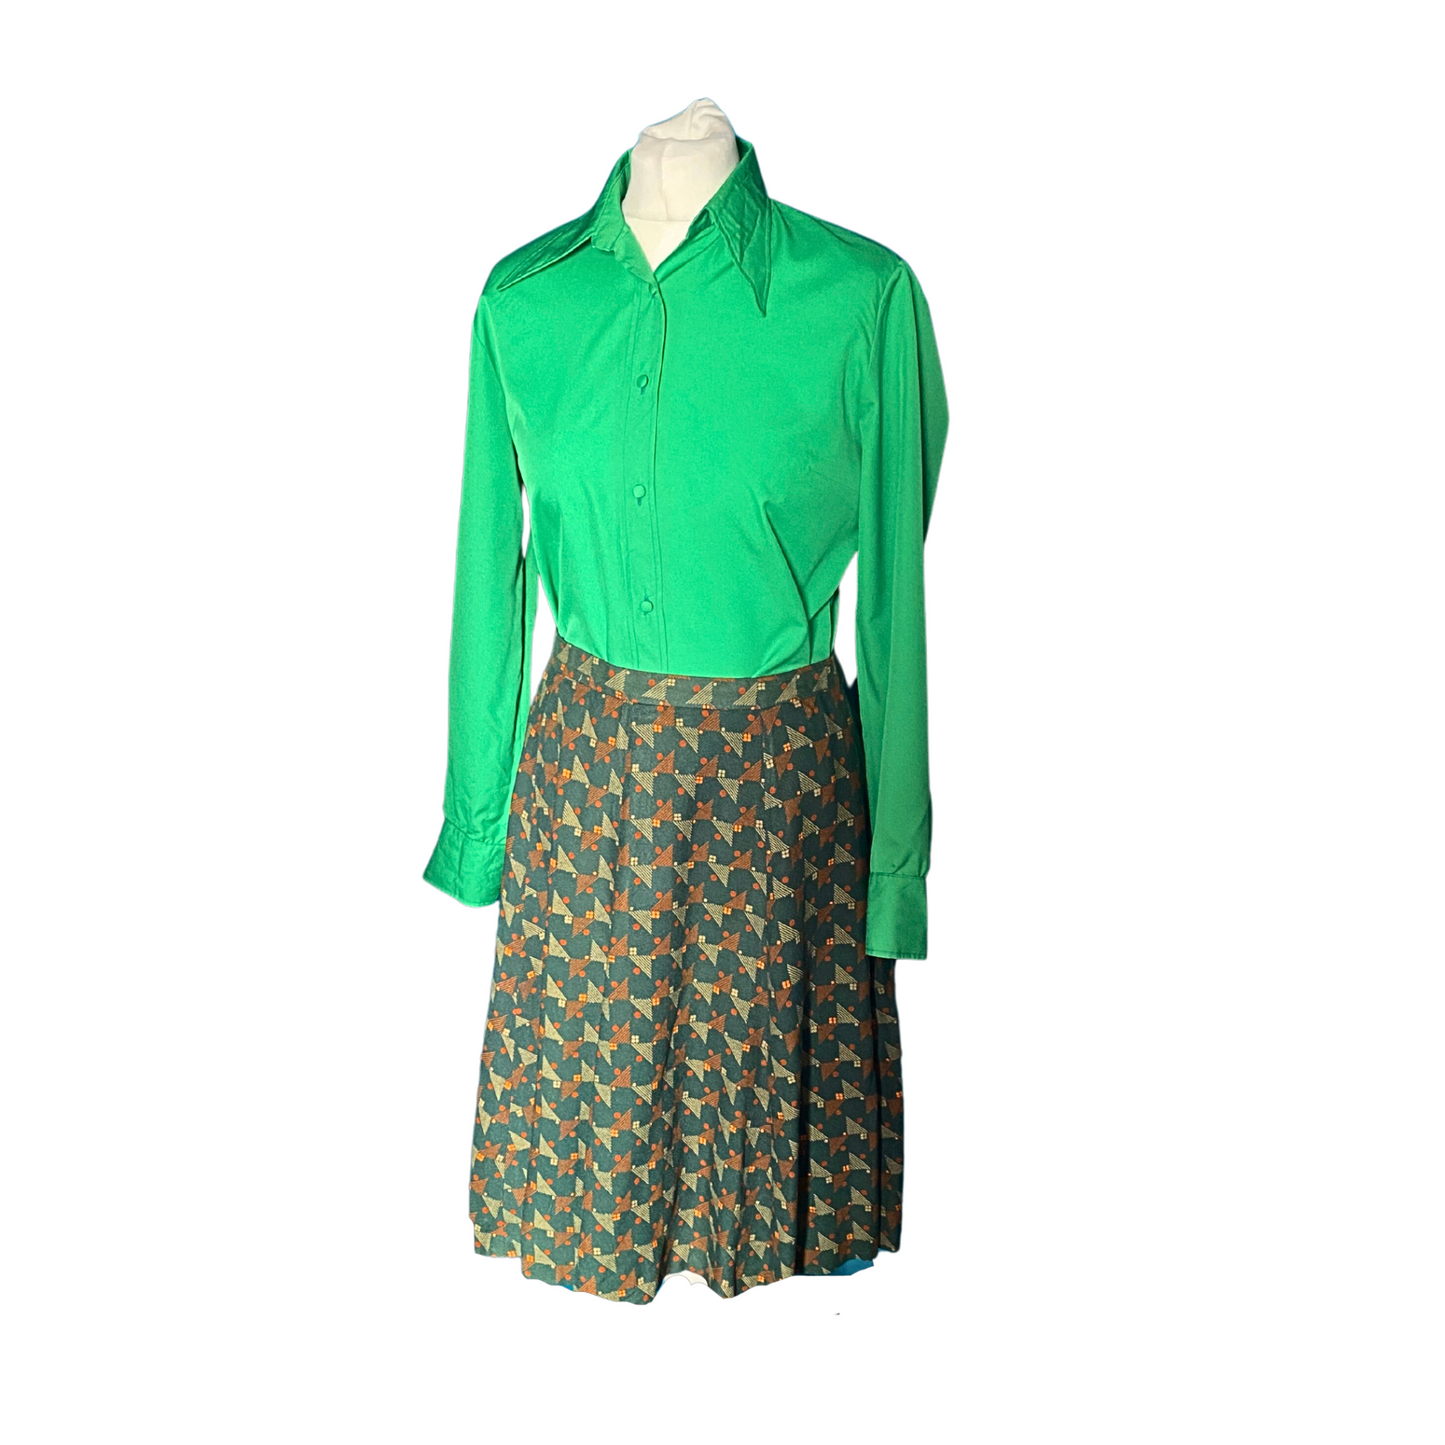 Flared green skirt with orange and cream triangle and circle design - Fully lined Shown with green 70s shirt 